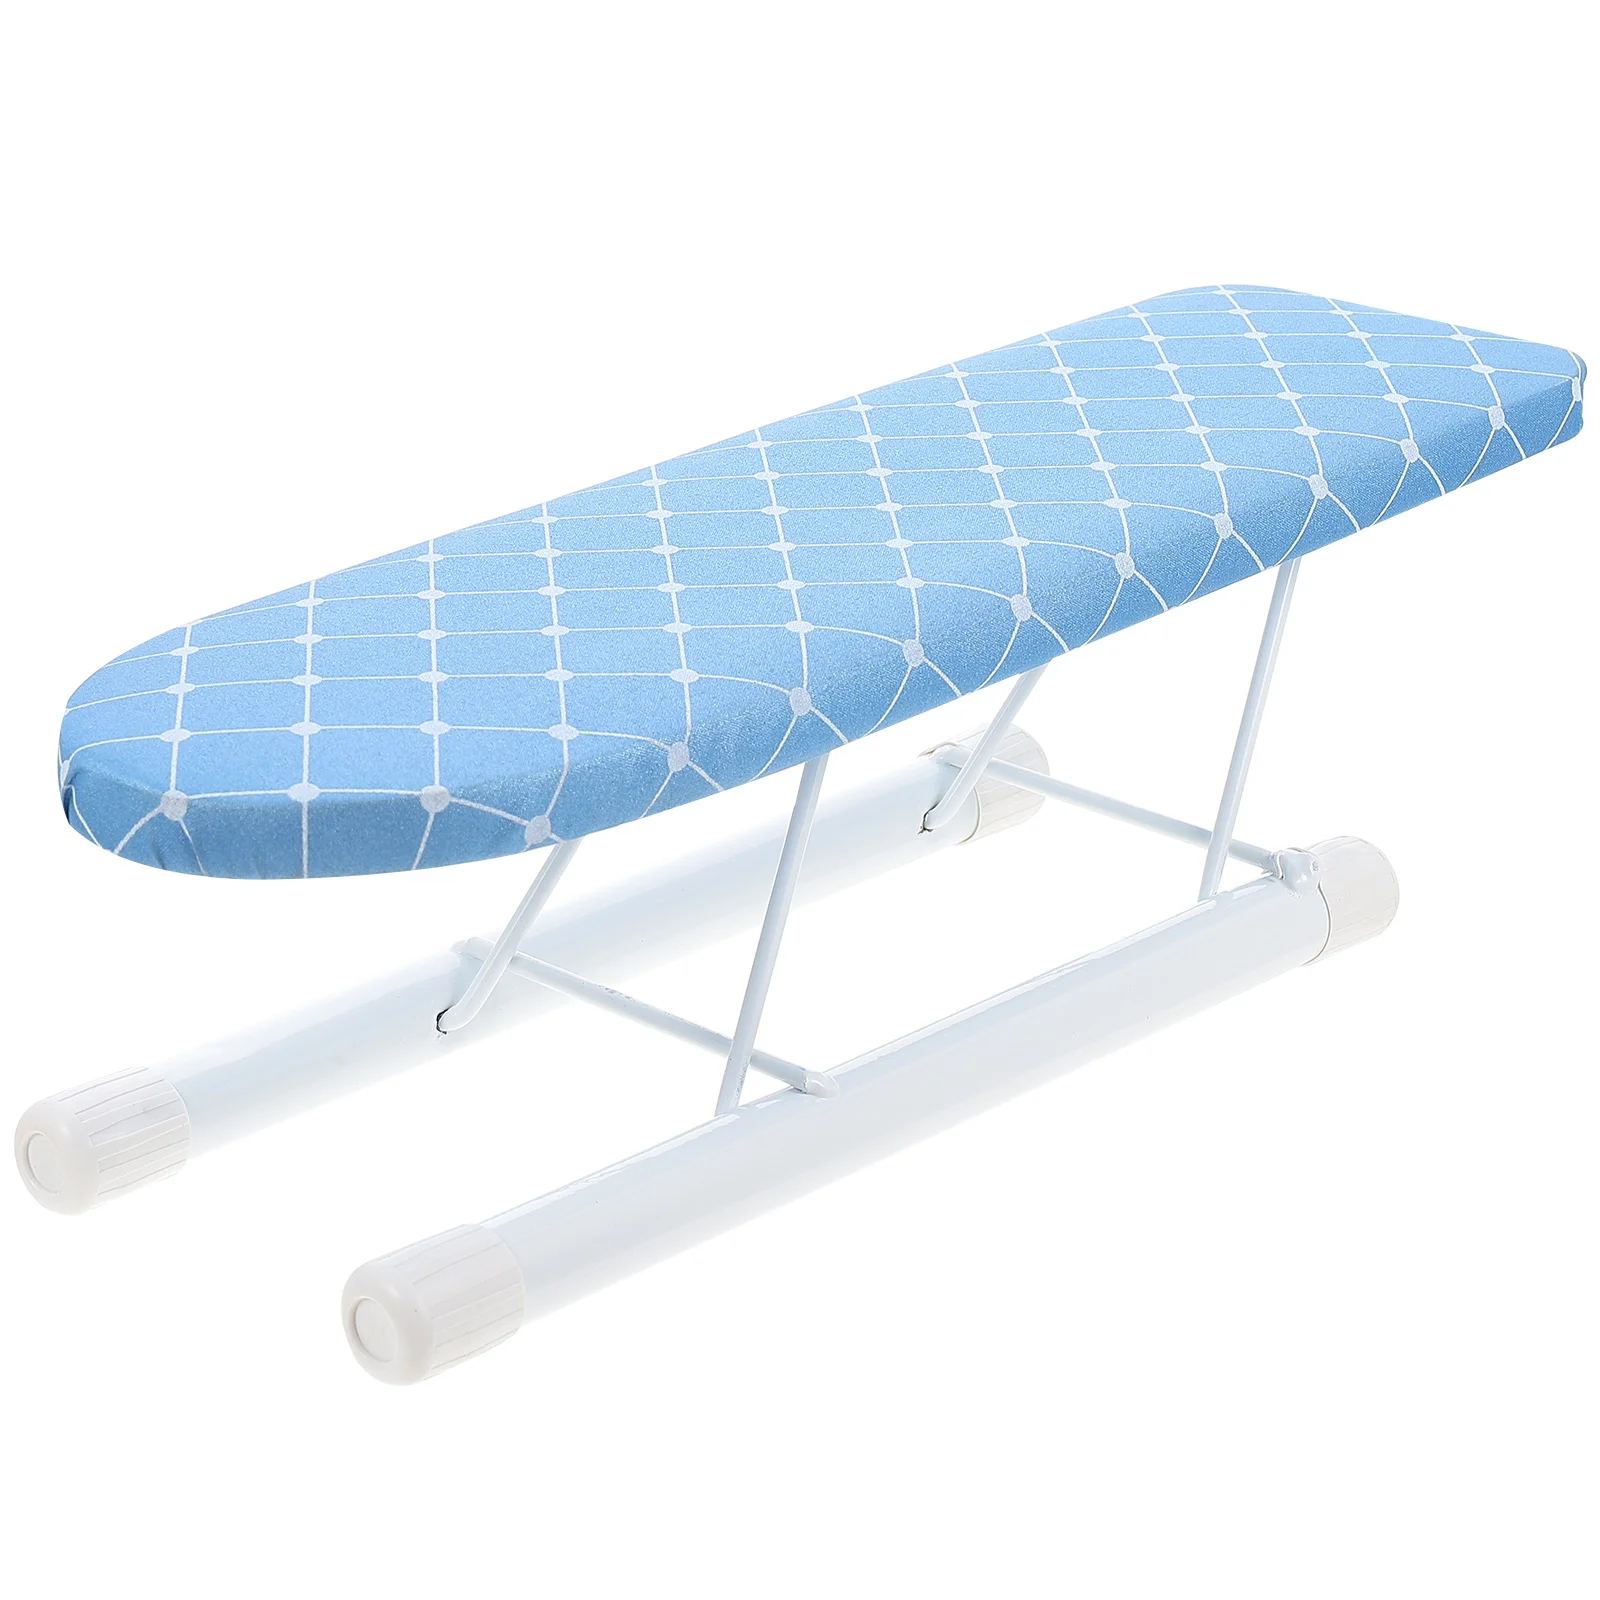 

Ironing Board Iron Tabletop Mini Table Portable Folding Foldable Boards Sleeve Rack Clothes Countertop Clothing Shelf Tool Bench